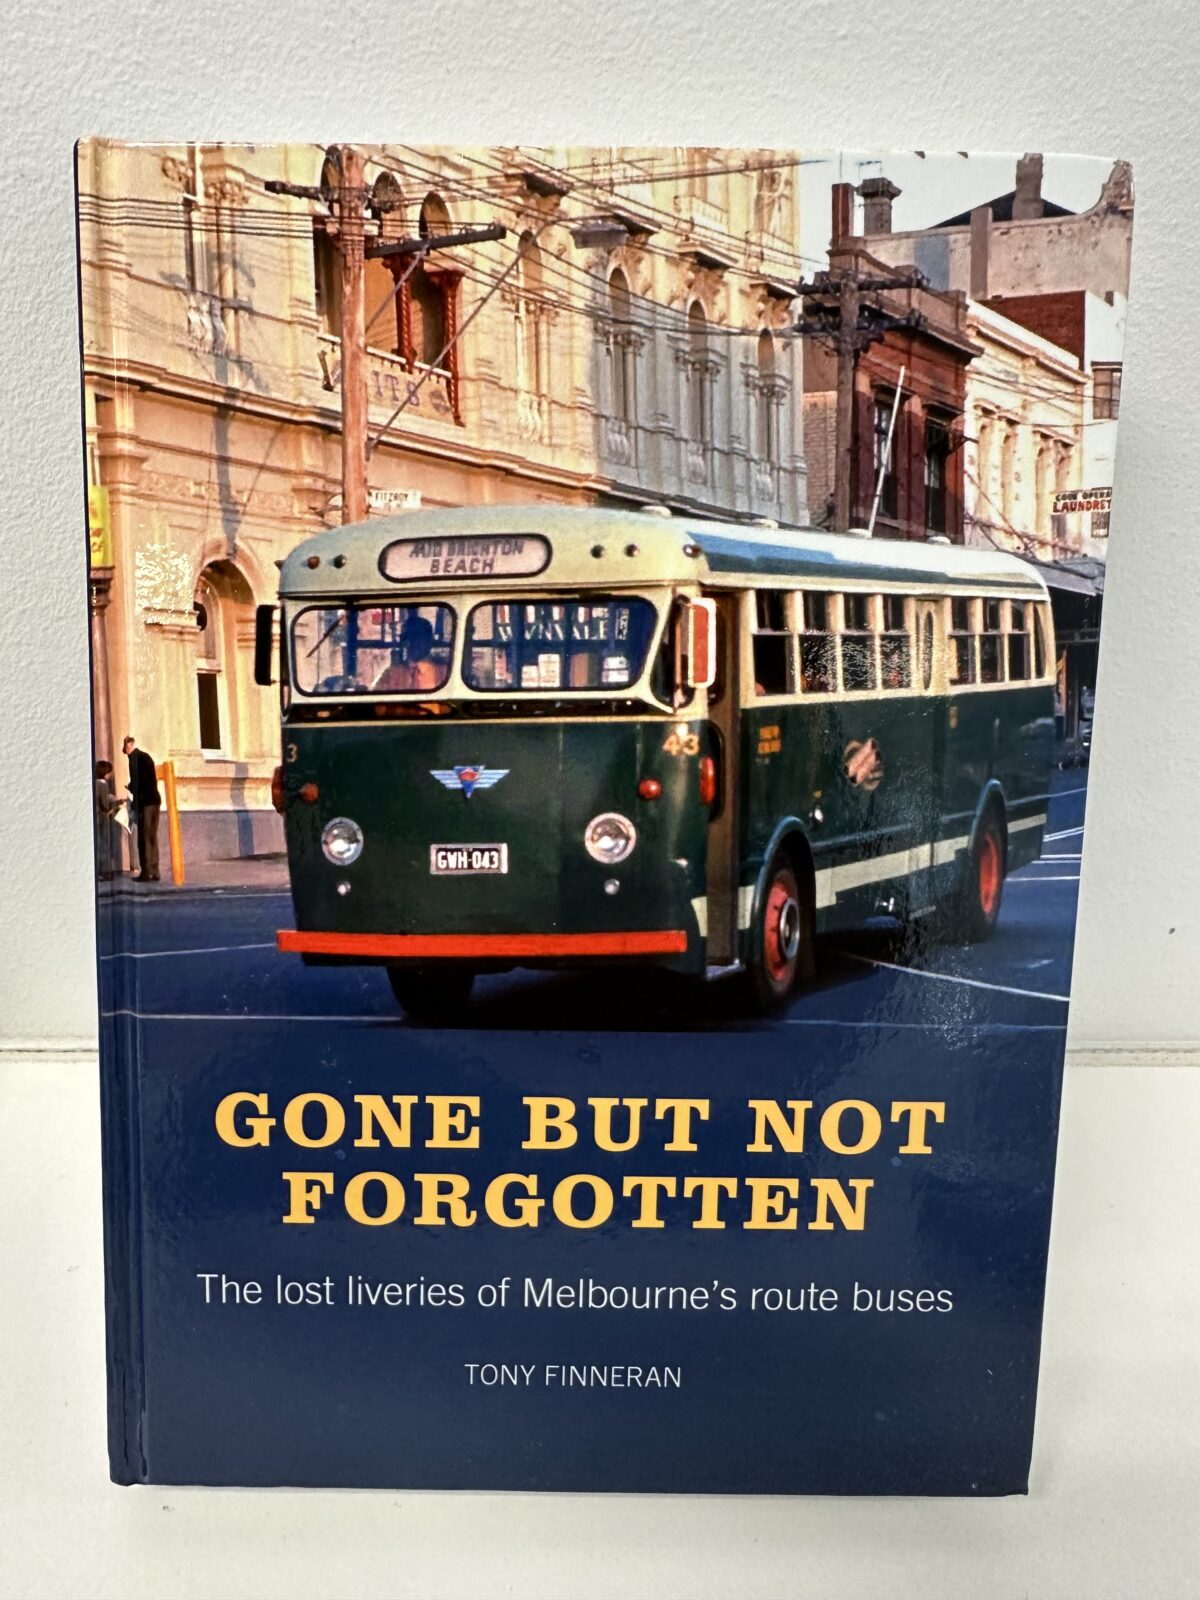 The Lost Liveries of Melbourne's route buses